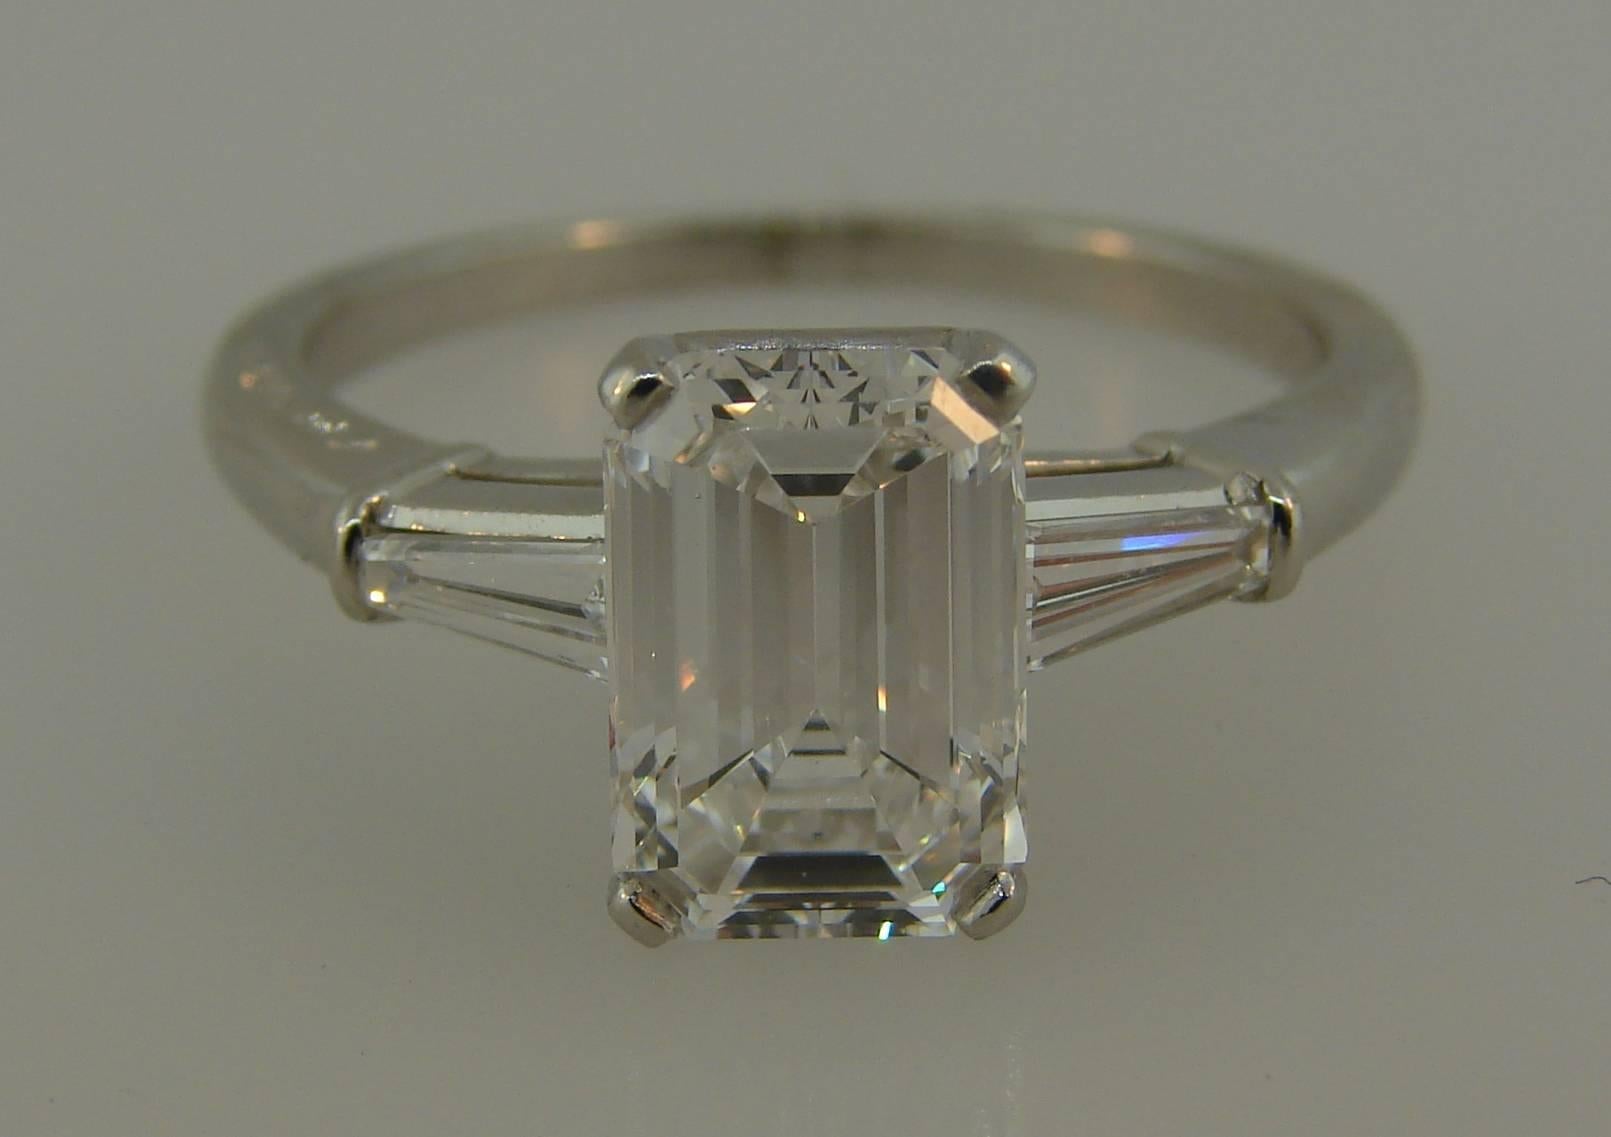 Stunning engagement ring created by Cartier. Classic design, the whitest D color diamond - her answer is definitely 